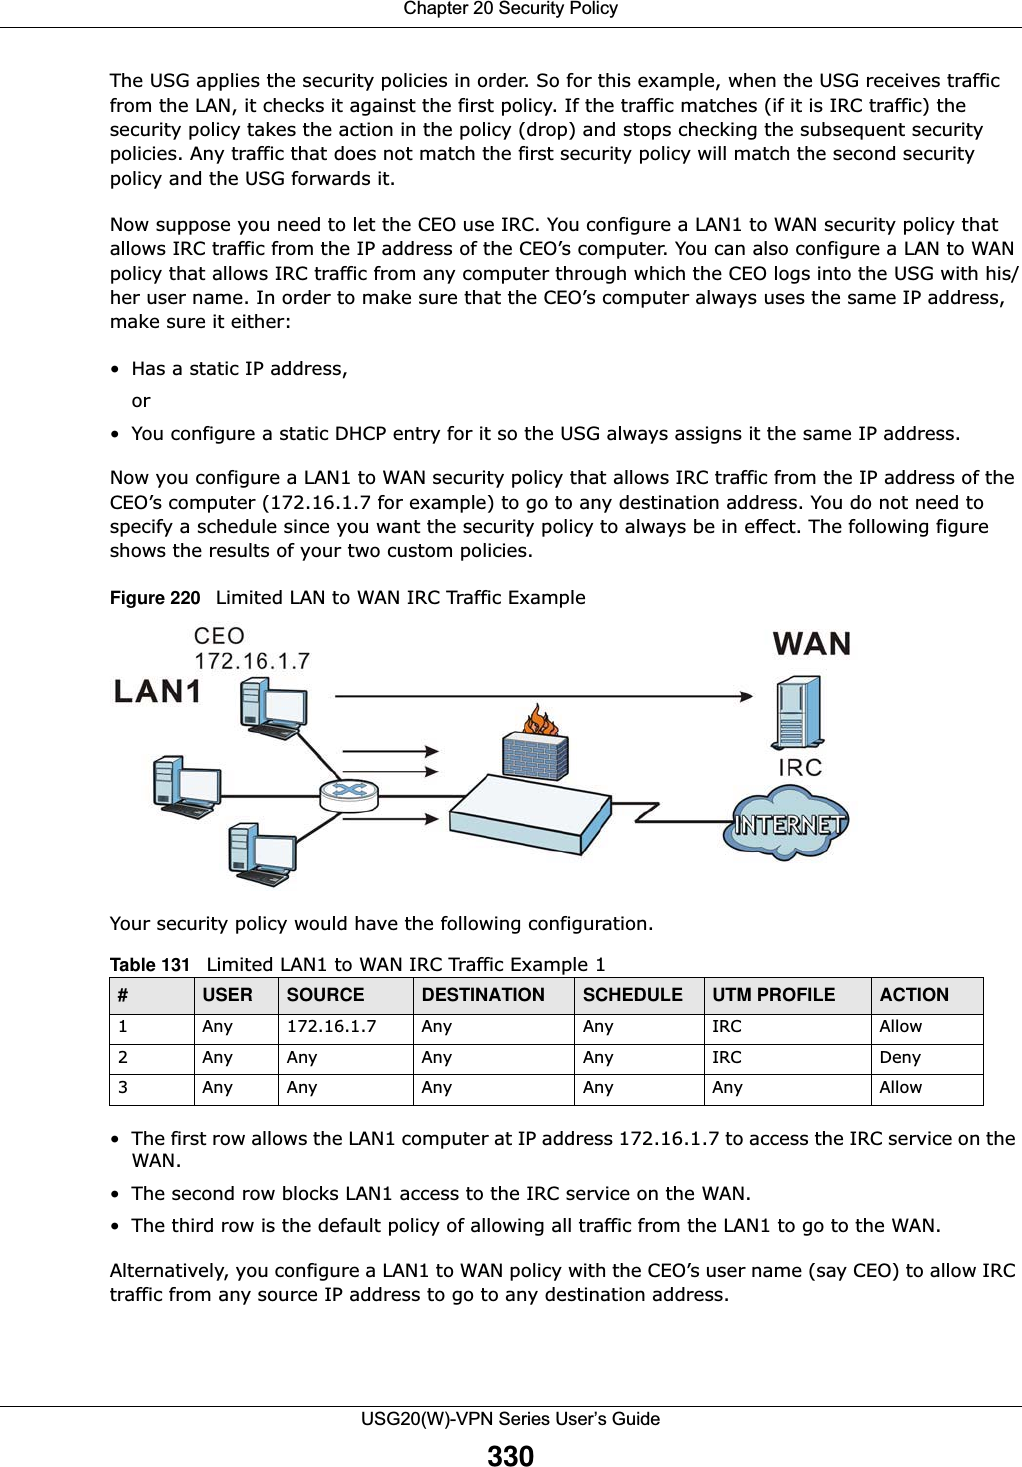 Chapter 20 Security PolicyUSG20(W)-VPN Series User’s Guide330The USG applies the security policies in order. So for this example, when the USG receives traffic from the LAN, it checks it against the first policy. If the traffic matches (if it is IRC traffic) the security policy takes the action in the policy (drop) and stops checking the subsequent security policies. Any traffic that does not match the first security policy will match the second security policy and the USG forwards it. Now suppose you need to let the CEO use IRC. You configure a LAN1 to WAN security policy that allows IRC traffic from the IP address of the CEO’s computer. You can also configure a LAN to WAN policy that allows IRC traffic from any computer through which the CEO logs into the USG with his/her user name. In order to make sure that the CEO’s computer always uses the same IP address, make sure it either:• Has a static IP address, or • You configure a static DHCP entry for it so the USG always assigns it the same IP address.Now you configure a LAN1 to WAN security policy that allows IRC traffic from the IP address of the CEO’s computer (172.16.1.7 for example) to go to any destination address. You do not need to specify a schedule since you want the security policy to always be in effect. The following figure shows the results of your two custom policies.Figure 220   Limited LAN to WAN IRC Traffic Example   Your security policy would have the following configuration. • The first row allows the LAN1 computer at IP address 172.16.1.7 to access the IRC service on the WAN. • The second row blocks LAN1 access to the IRC service on the WAN. • The third row is the default policy of allowing all traffic from the LAN1 to go to the WAN.Alternatively, you configure a LAN1 to WAN policy with the CEO’s user name (say CEO) to allow IRC traffic from any source IP address to go to any destination address.Table 131   Limited LAN1 to WAN IRC Traffic Example 1#USER SOURCE DESTINATION SCHEDULE UTM PROFILE ACTION1 Any 172.16.1.7 Any Any IRC Allow2 Any Any Any Any IRC Deny3 Any Any Any Any Any Allow